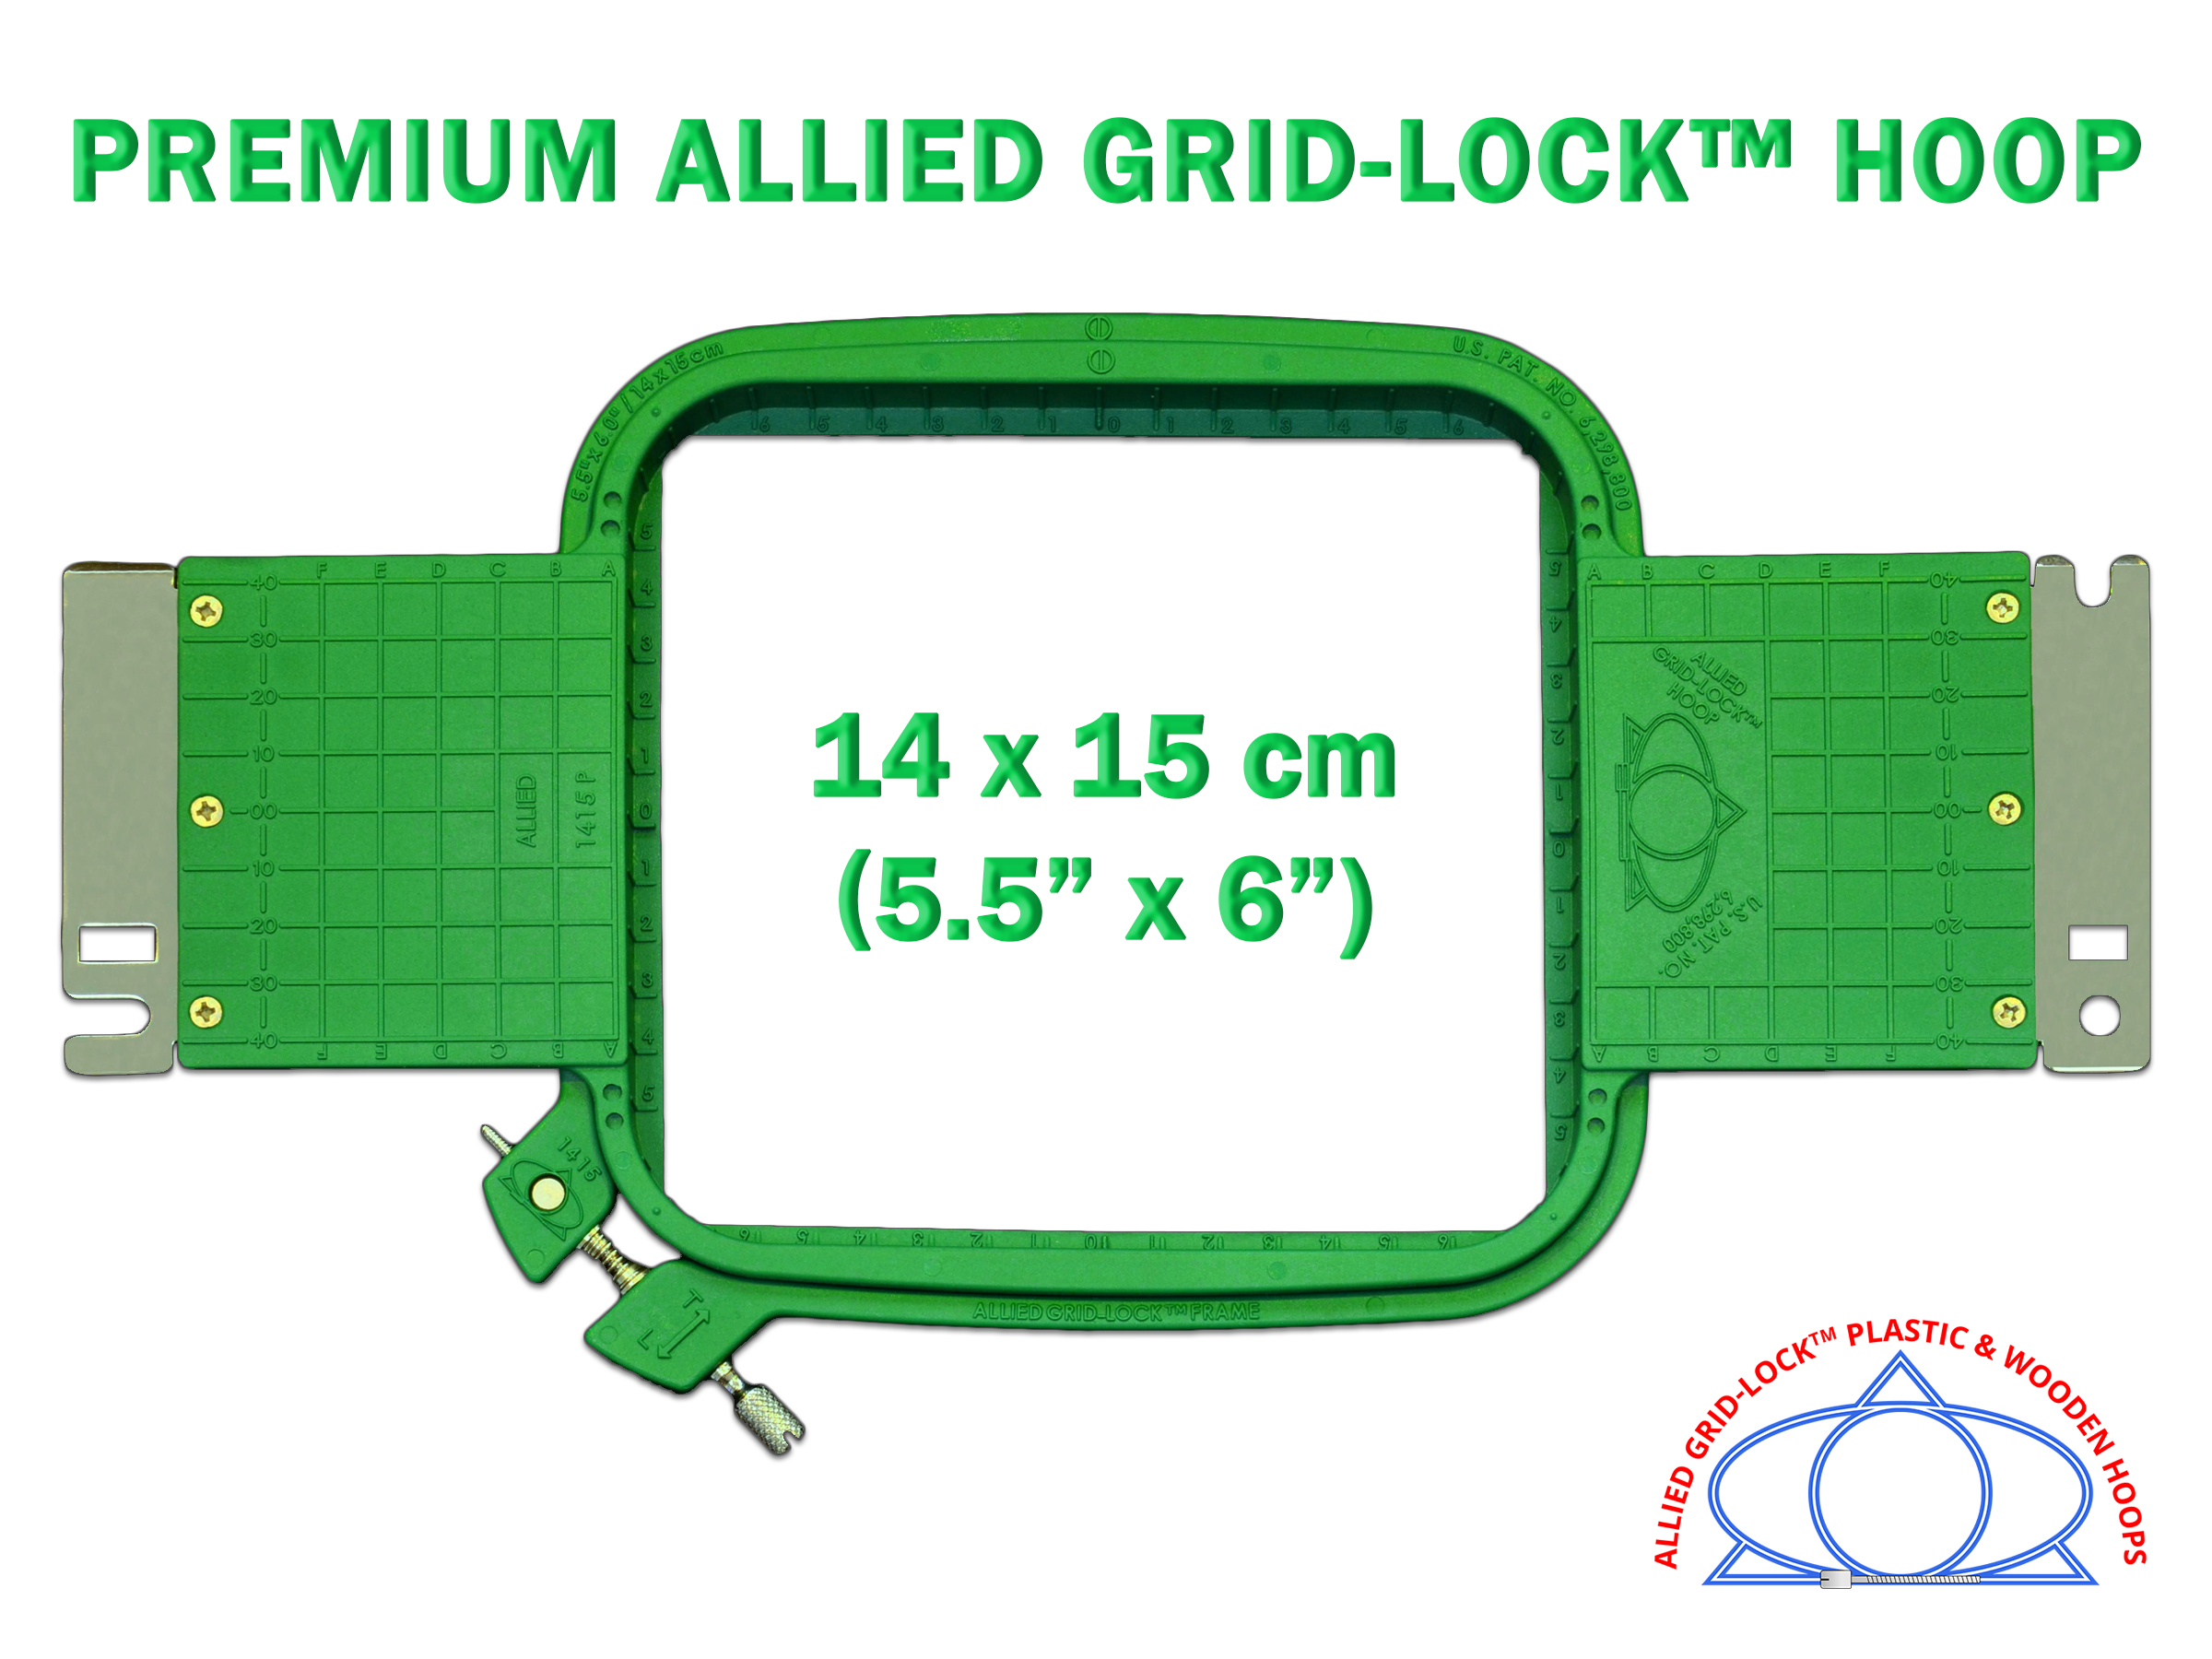 Allied Gridlock Hoop for Avance 5.5" x 6" Questions & Answers